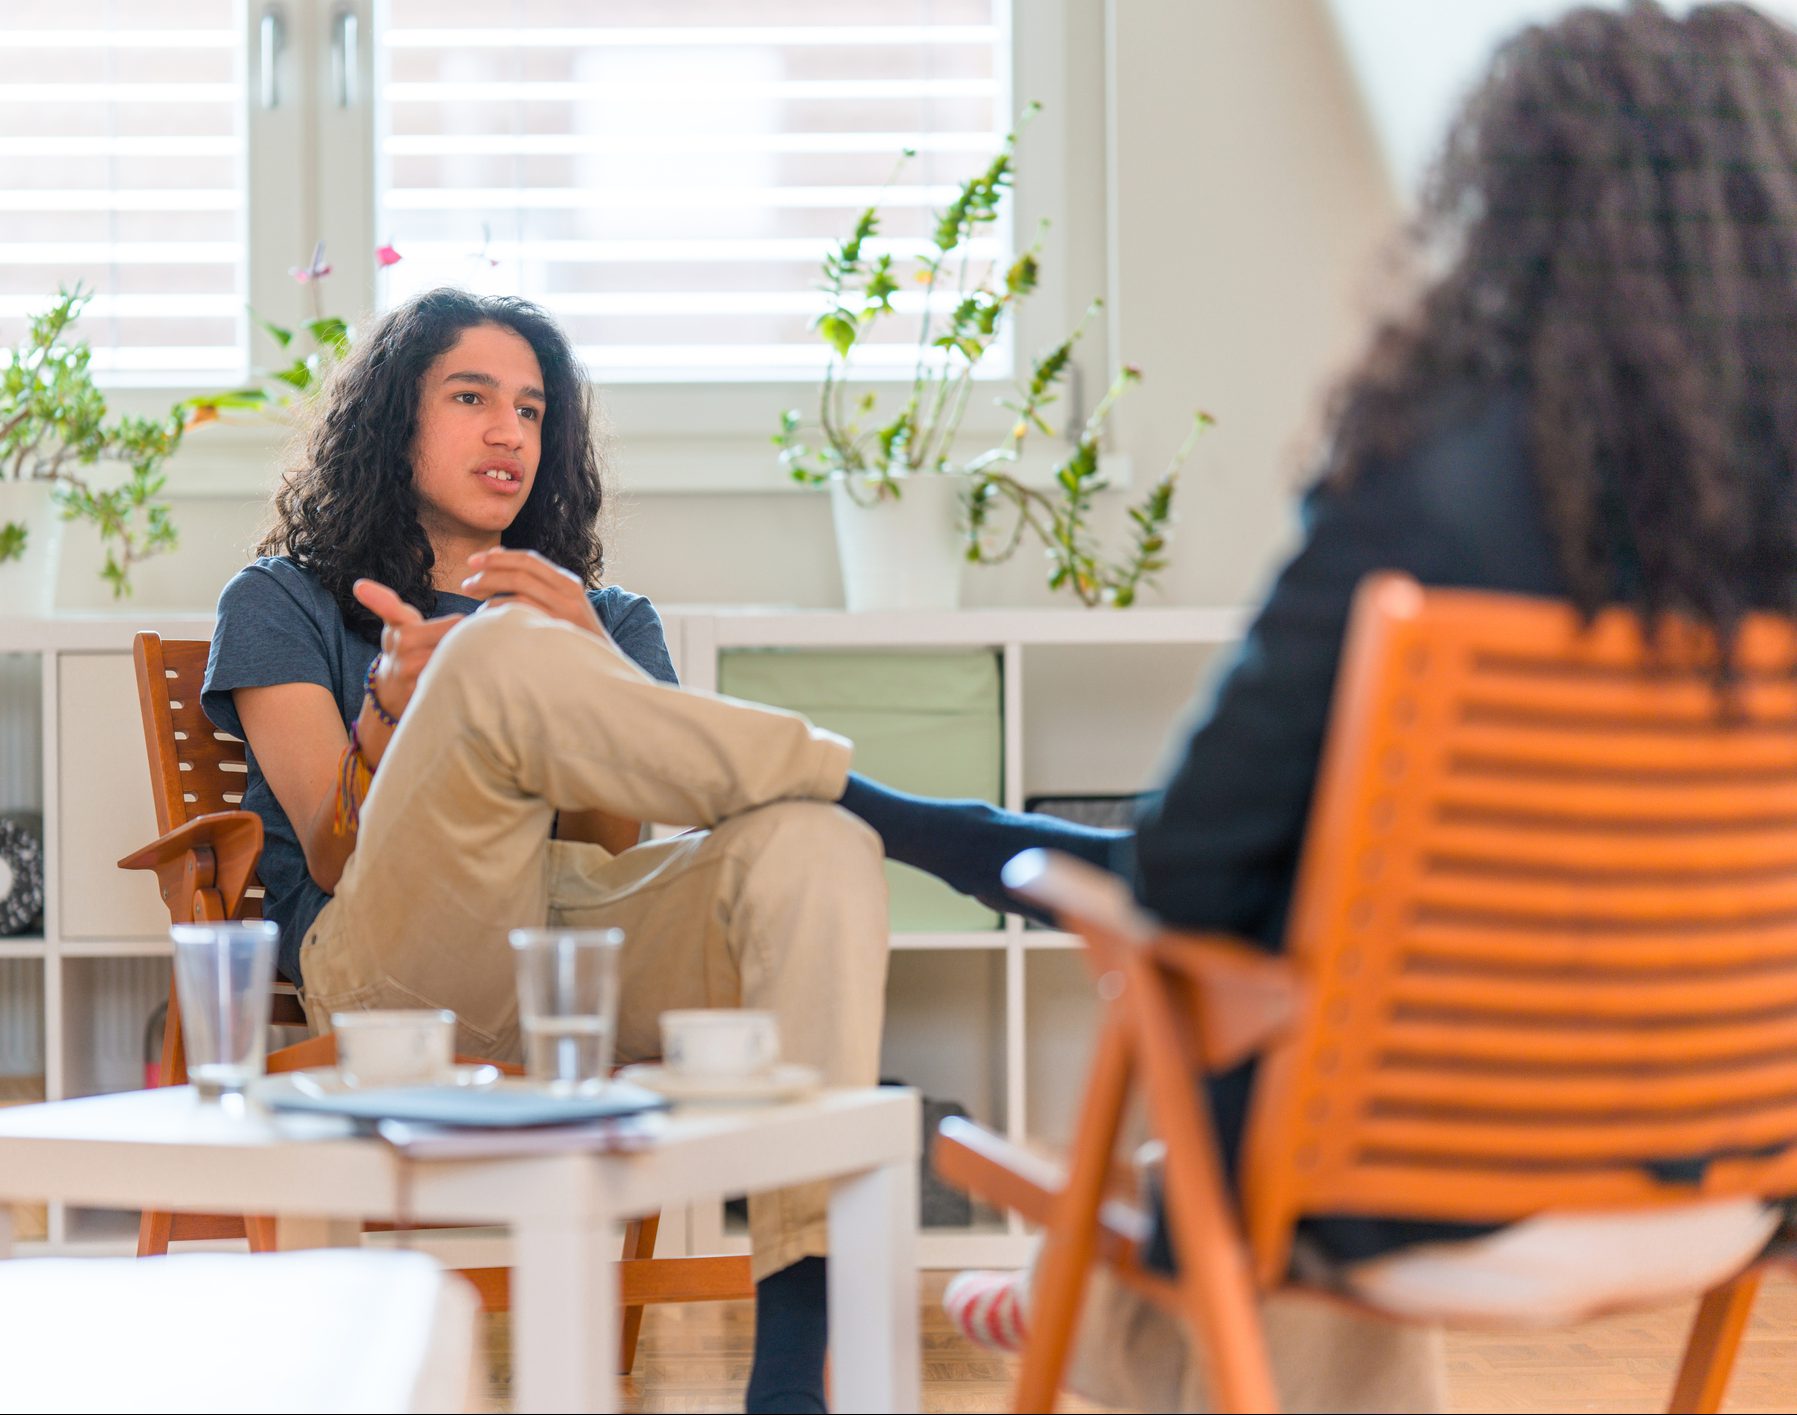 Young Hispanic man listening to mid adult woman mental health professional while sitting on sofa. They are conversing about his mental wellbeing.